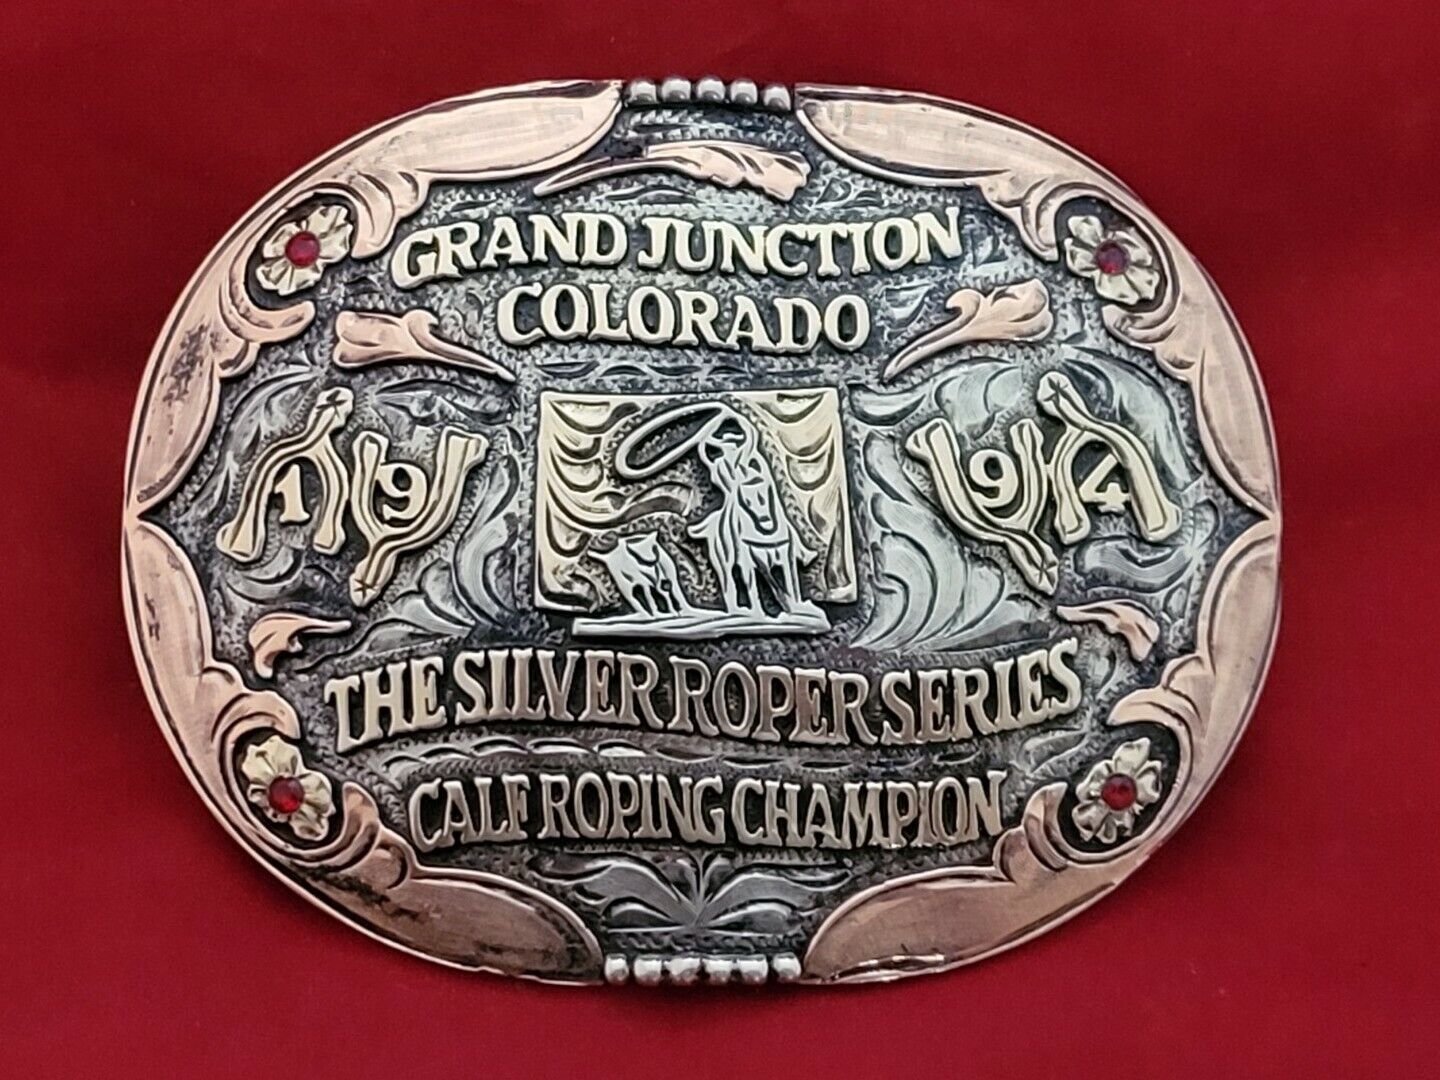 TROPHY RODEO CHAMPION BELT BUCKLE☆1994☆GRAND JUNCTION CO. CALF ROPING VINTAGE 40